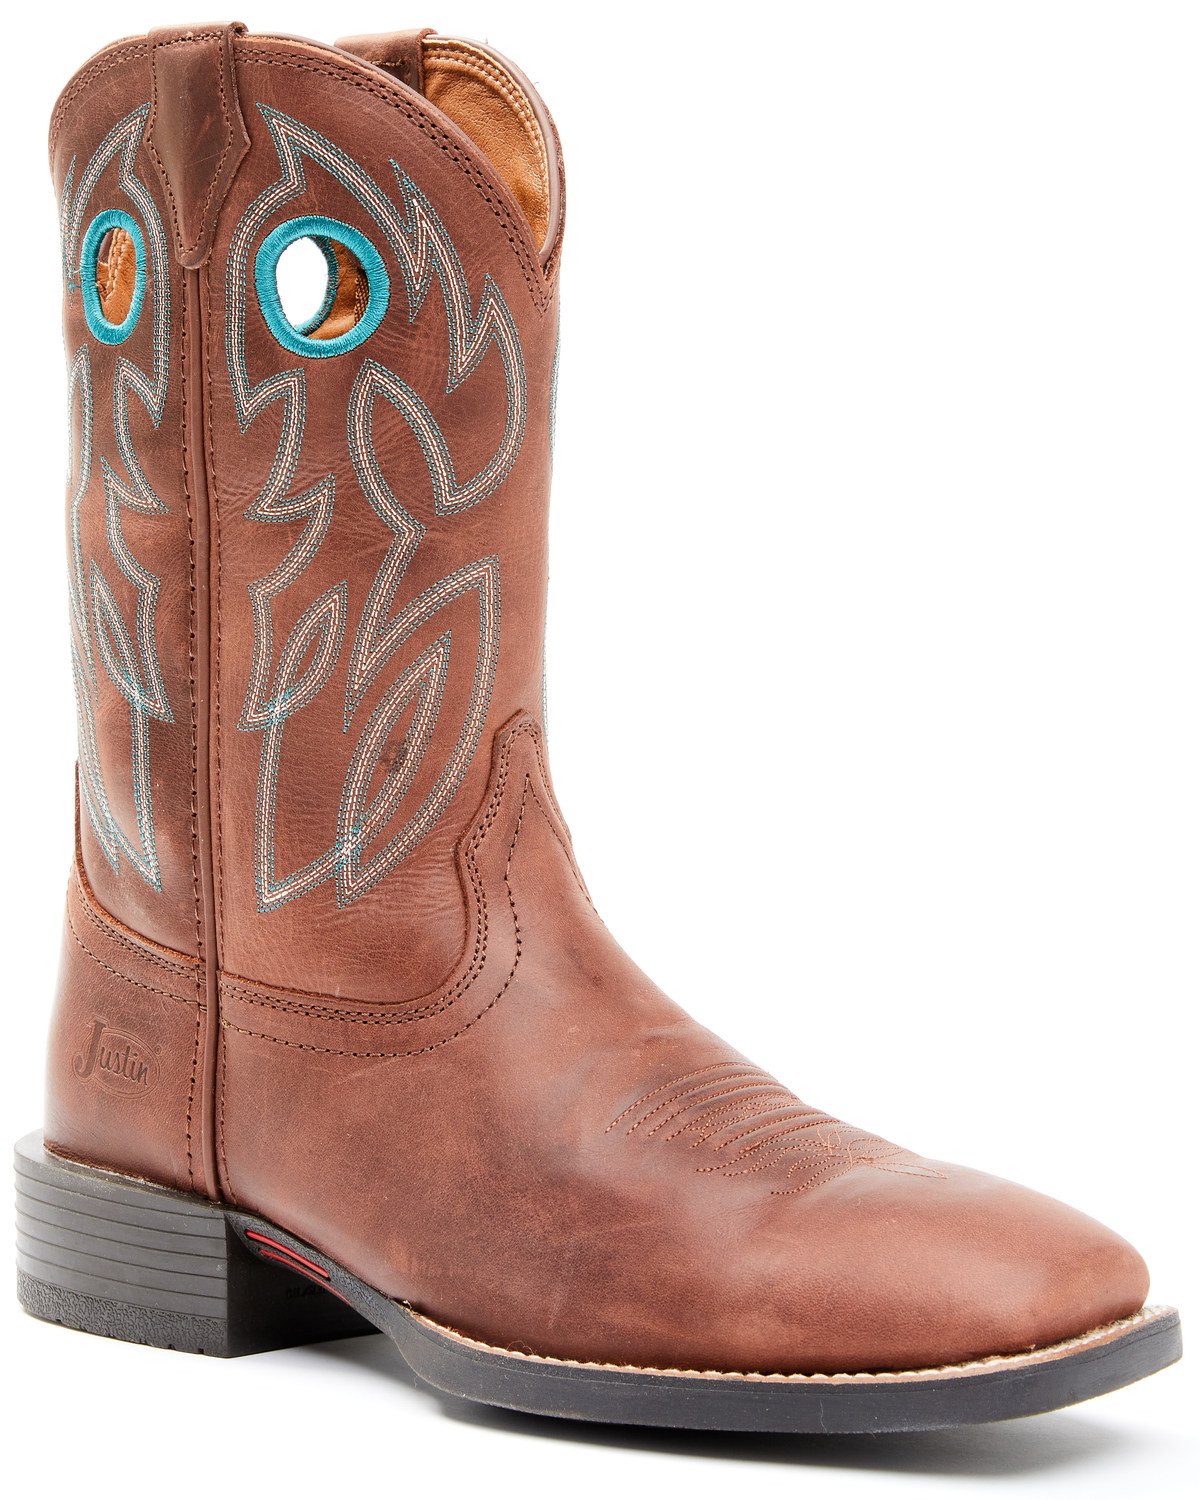 Justin Men's Brandy Bowline Cowhide Leather Western Boot - Broad Square Toe